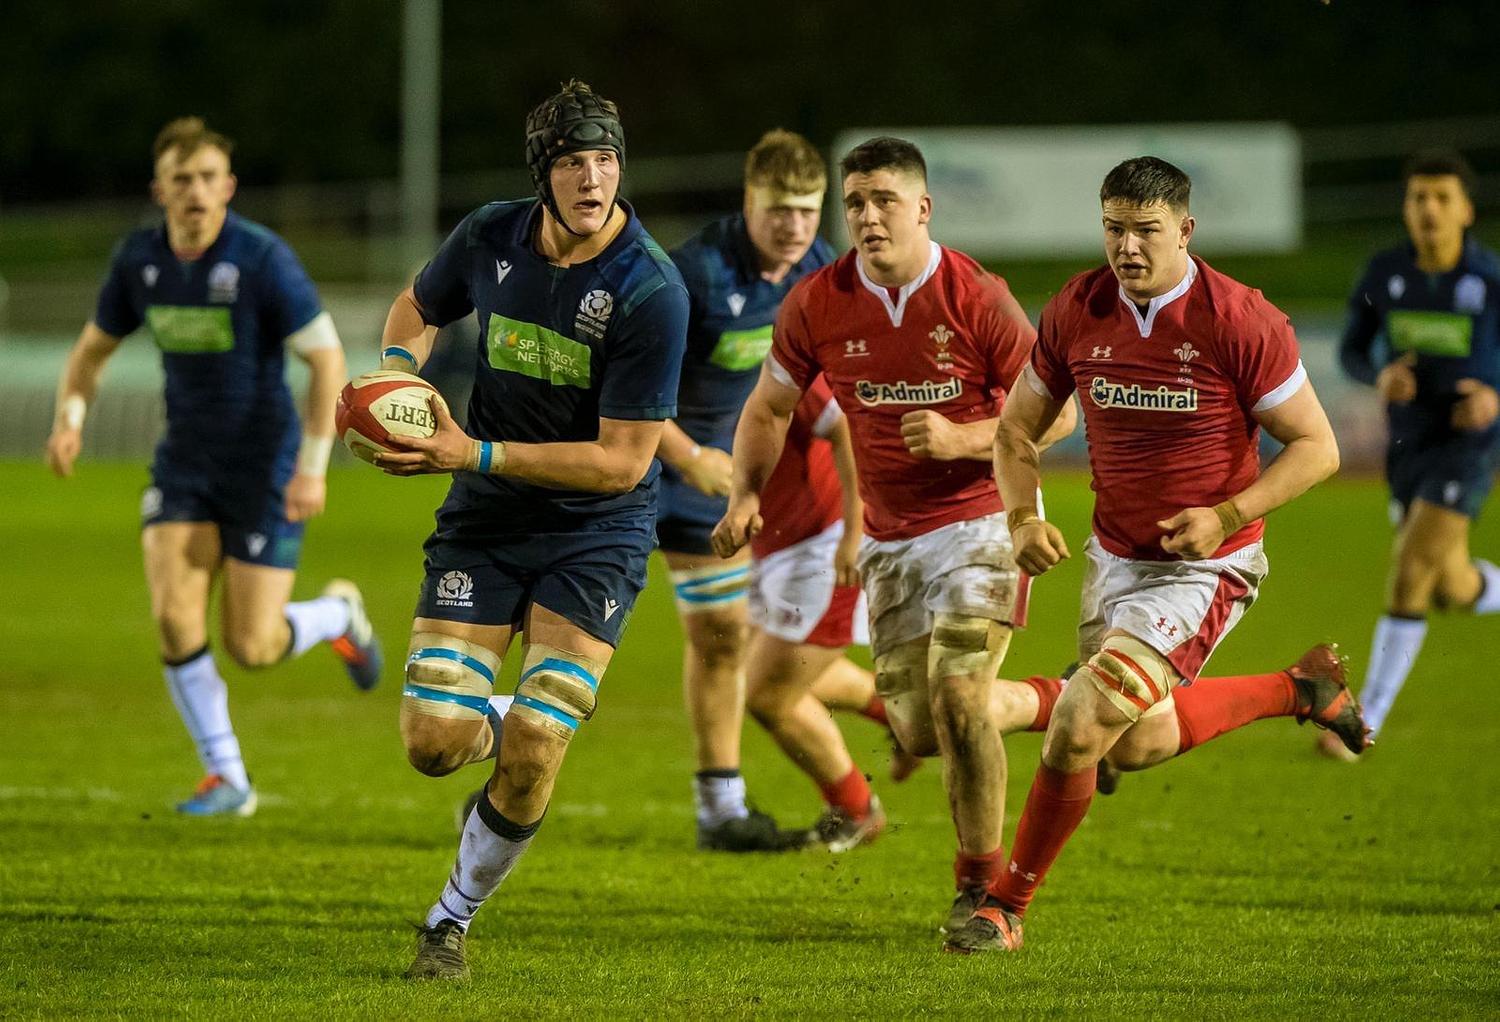 Hard-working and talented: Henderson latest former pupil to make Scotland rugby squad